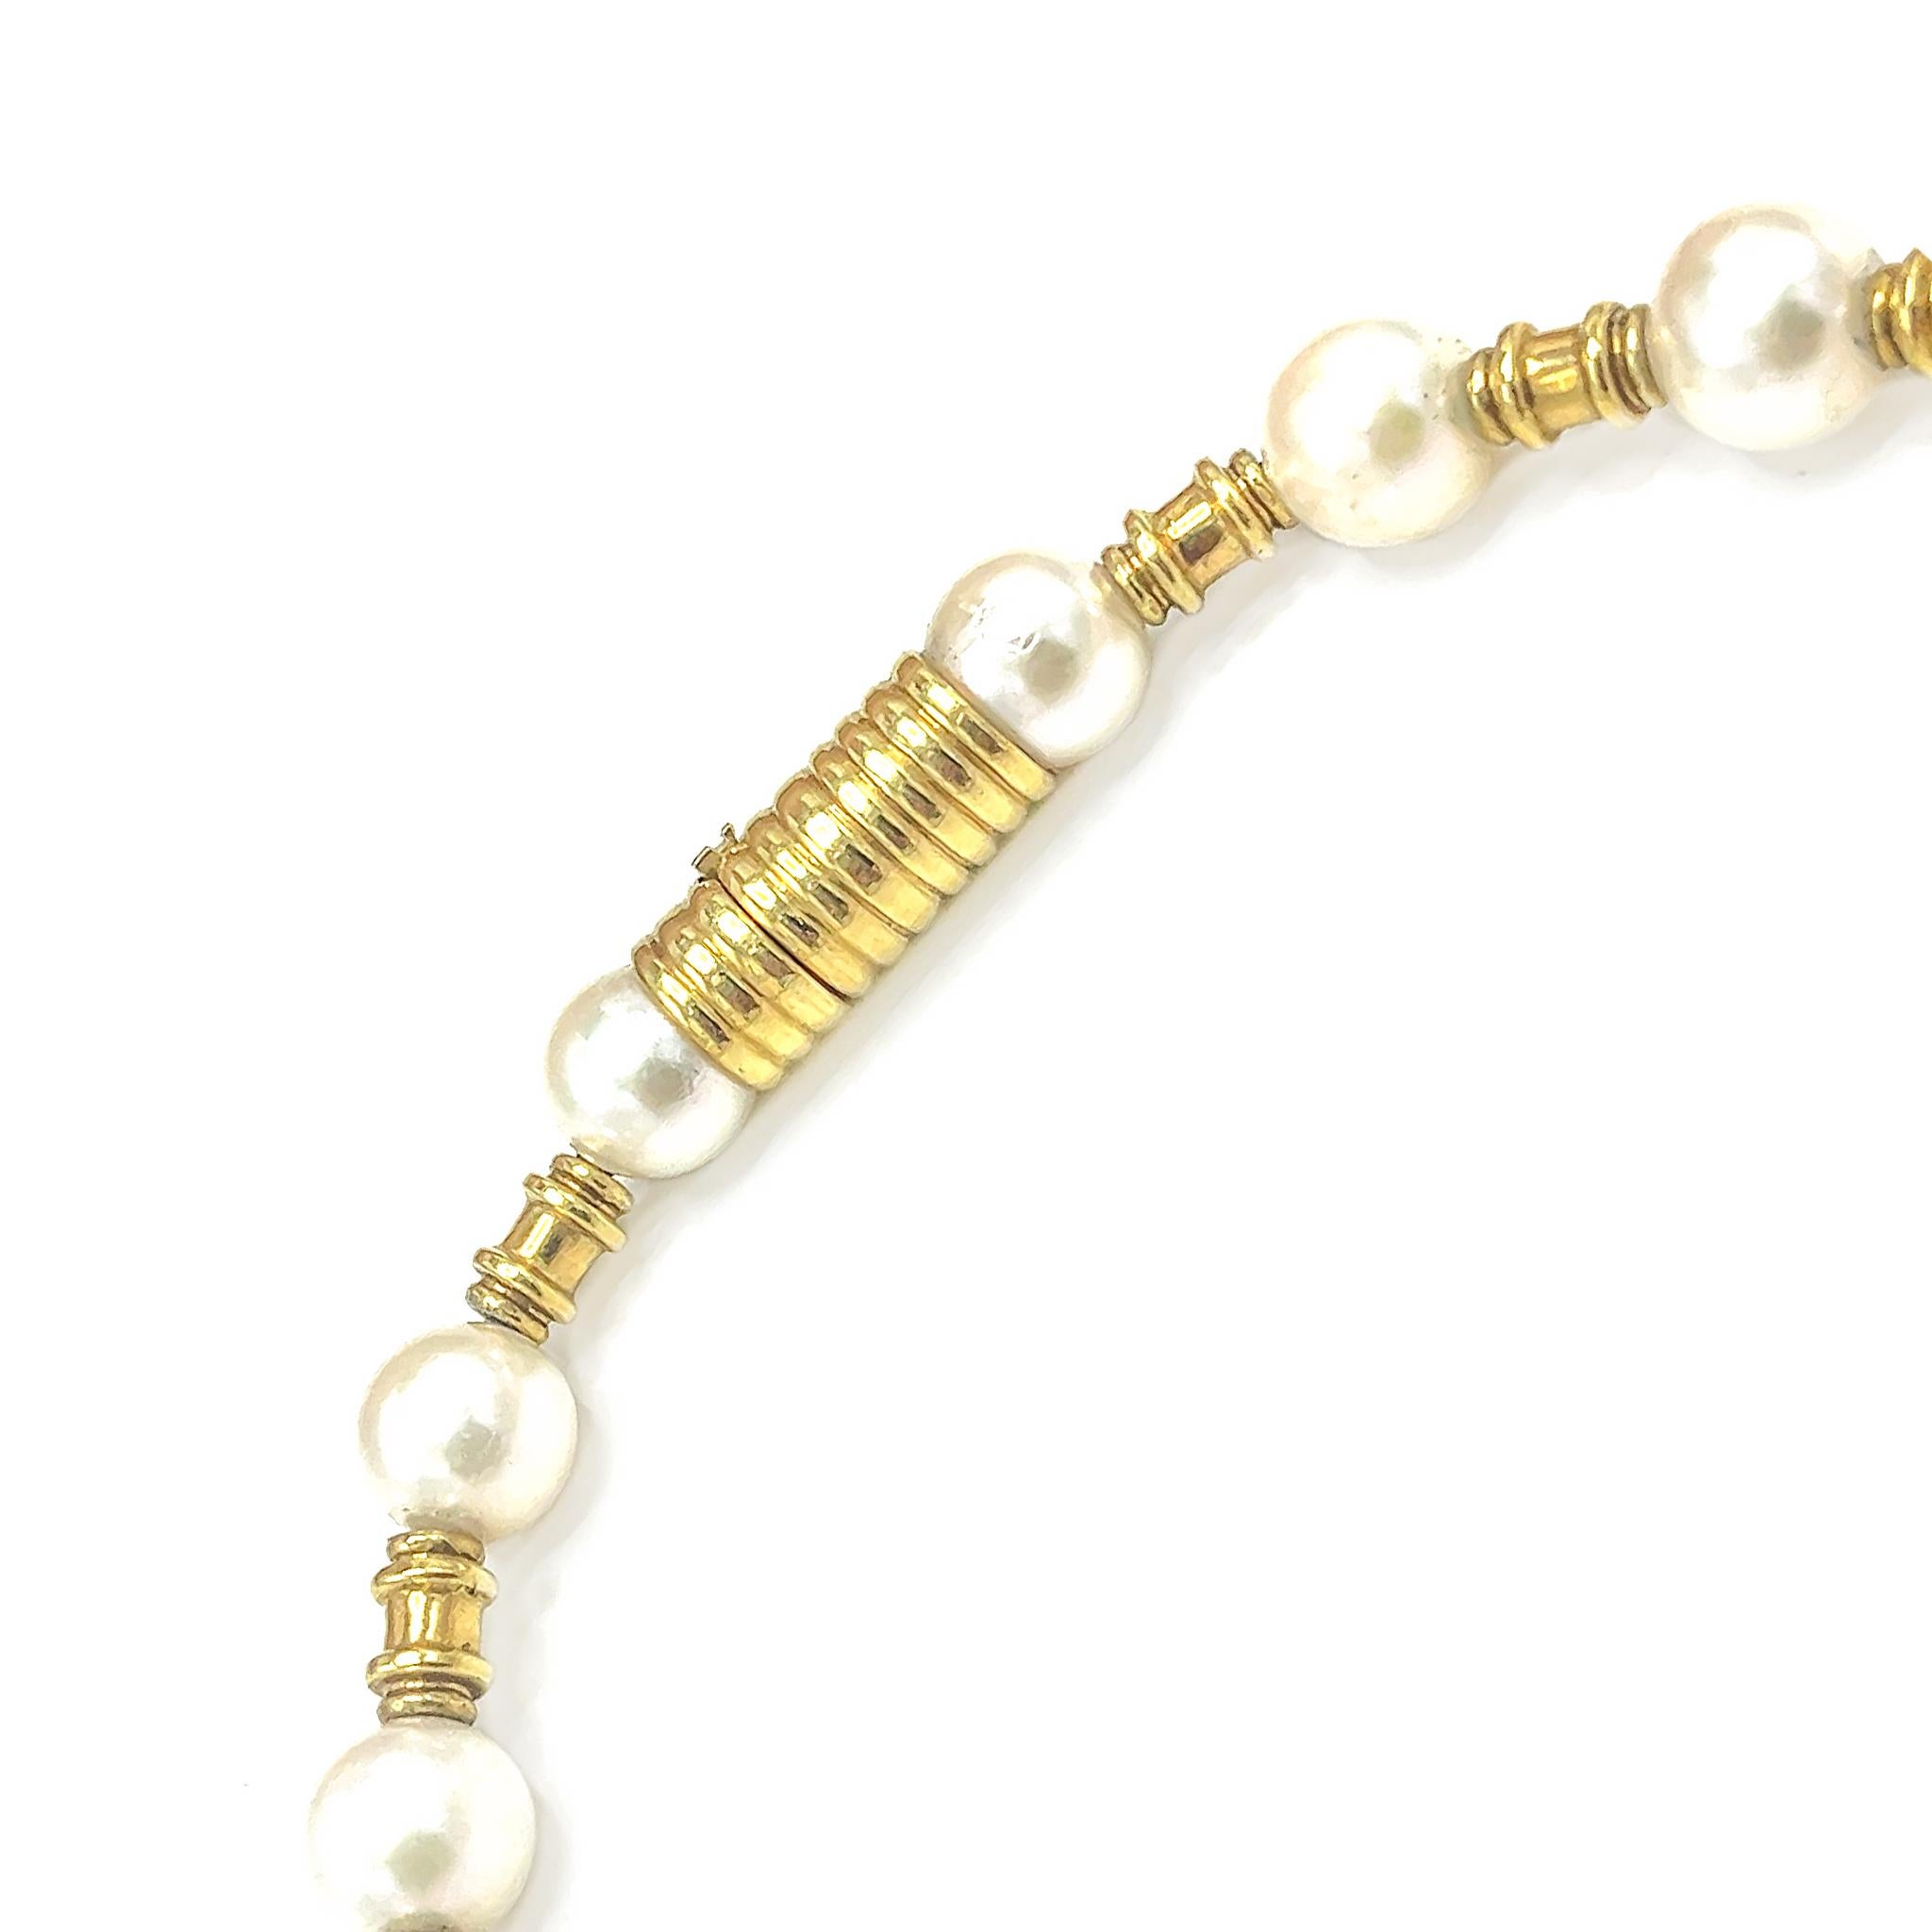 This stunning pearl necklace is a timeless piece of fine jewelry that will surely add luxury to any outfit.
18k Yellow Gold
Pearl: 8.5 mm to 9 mm
Length: 16.5 inches
Total Weight: 57 grams